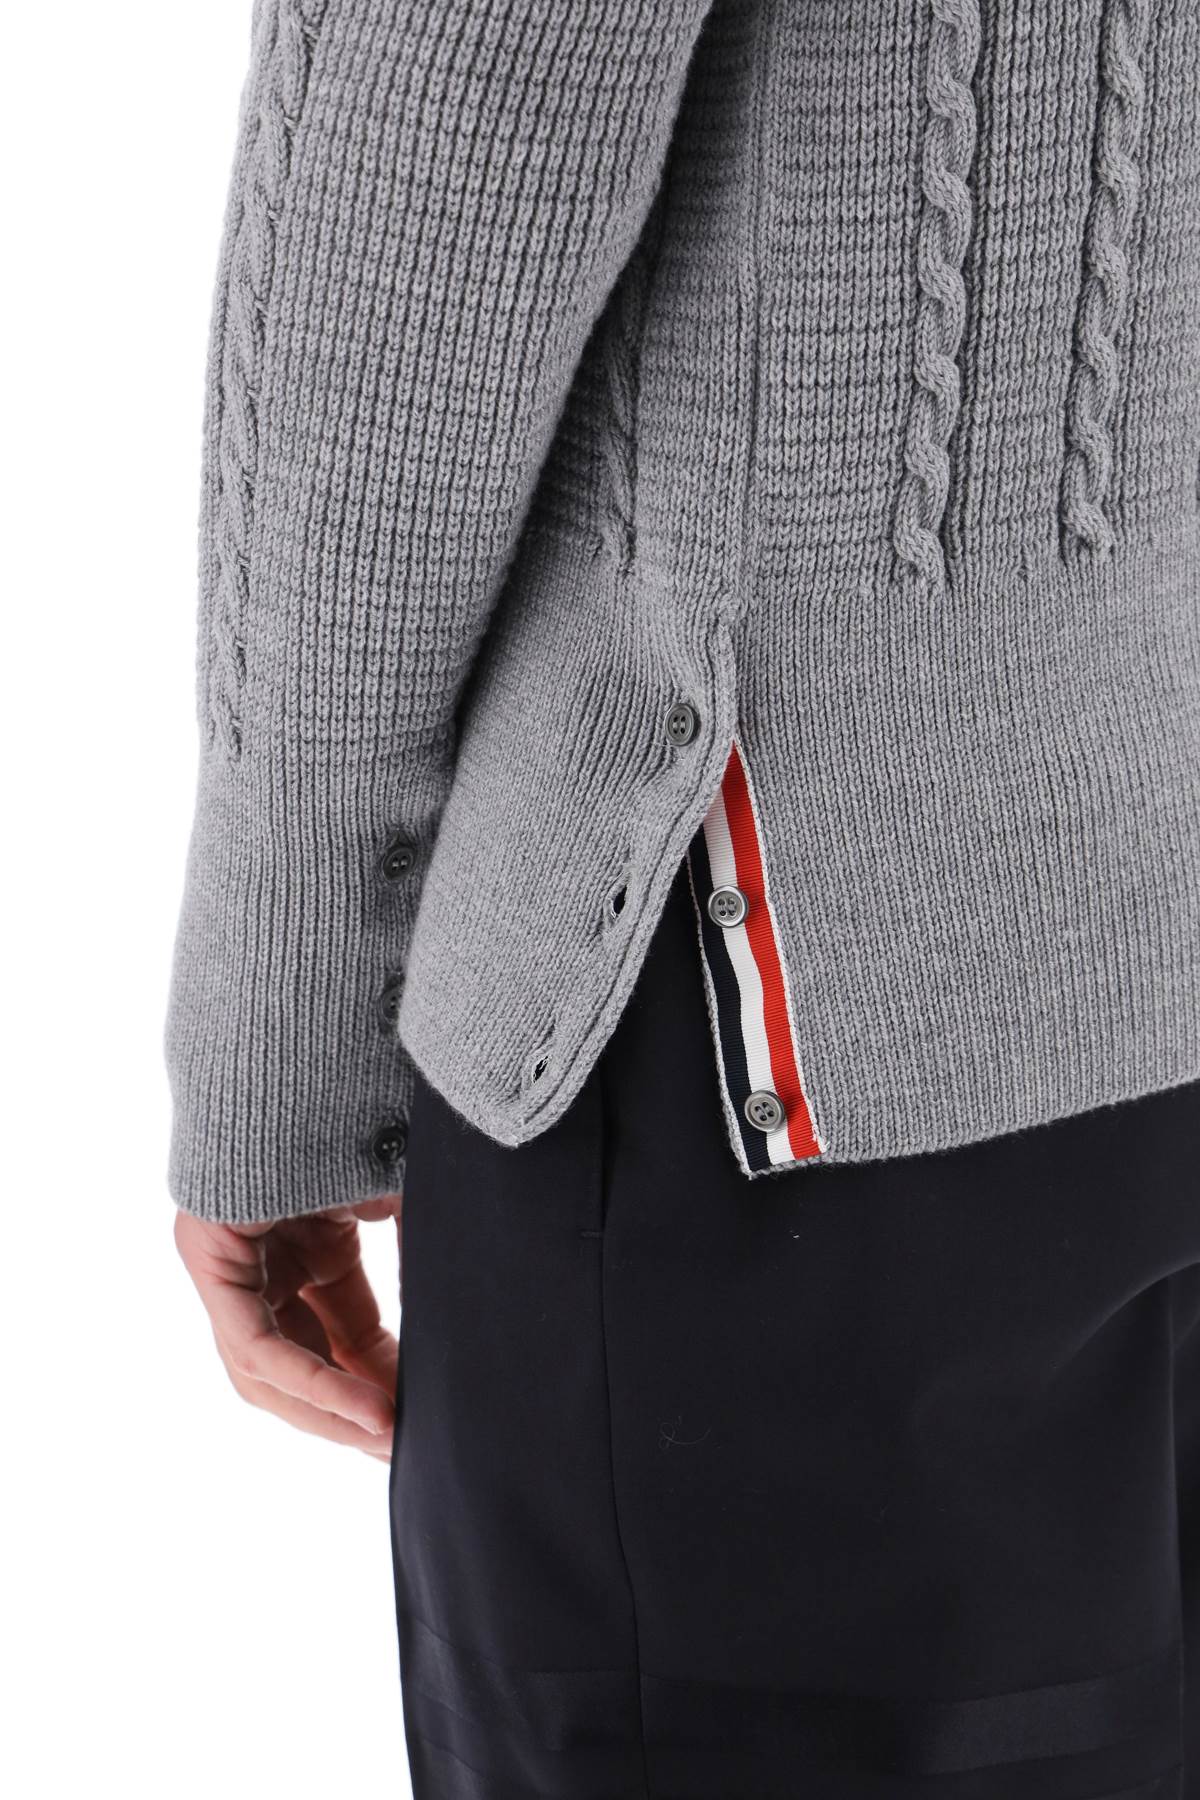 Thom Browne Thom browne cable wool sweater with rwb detail